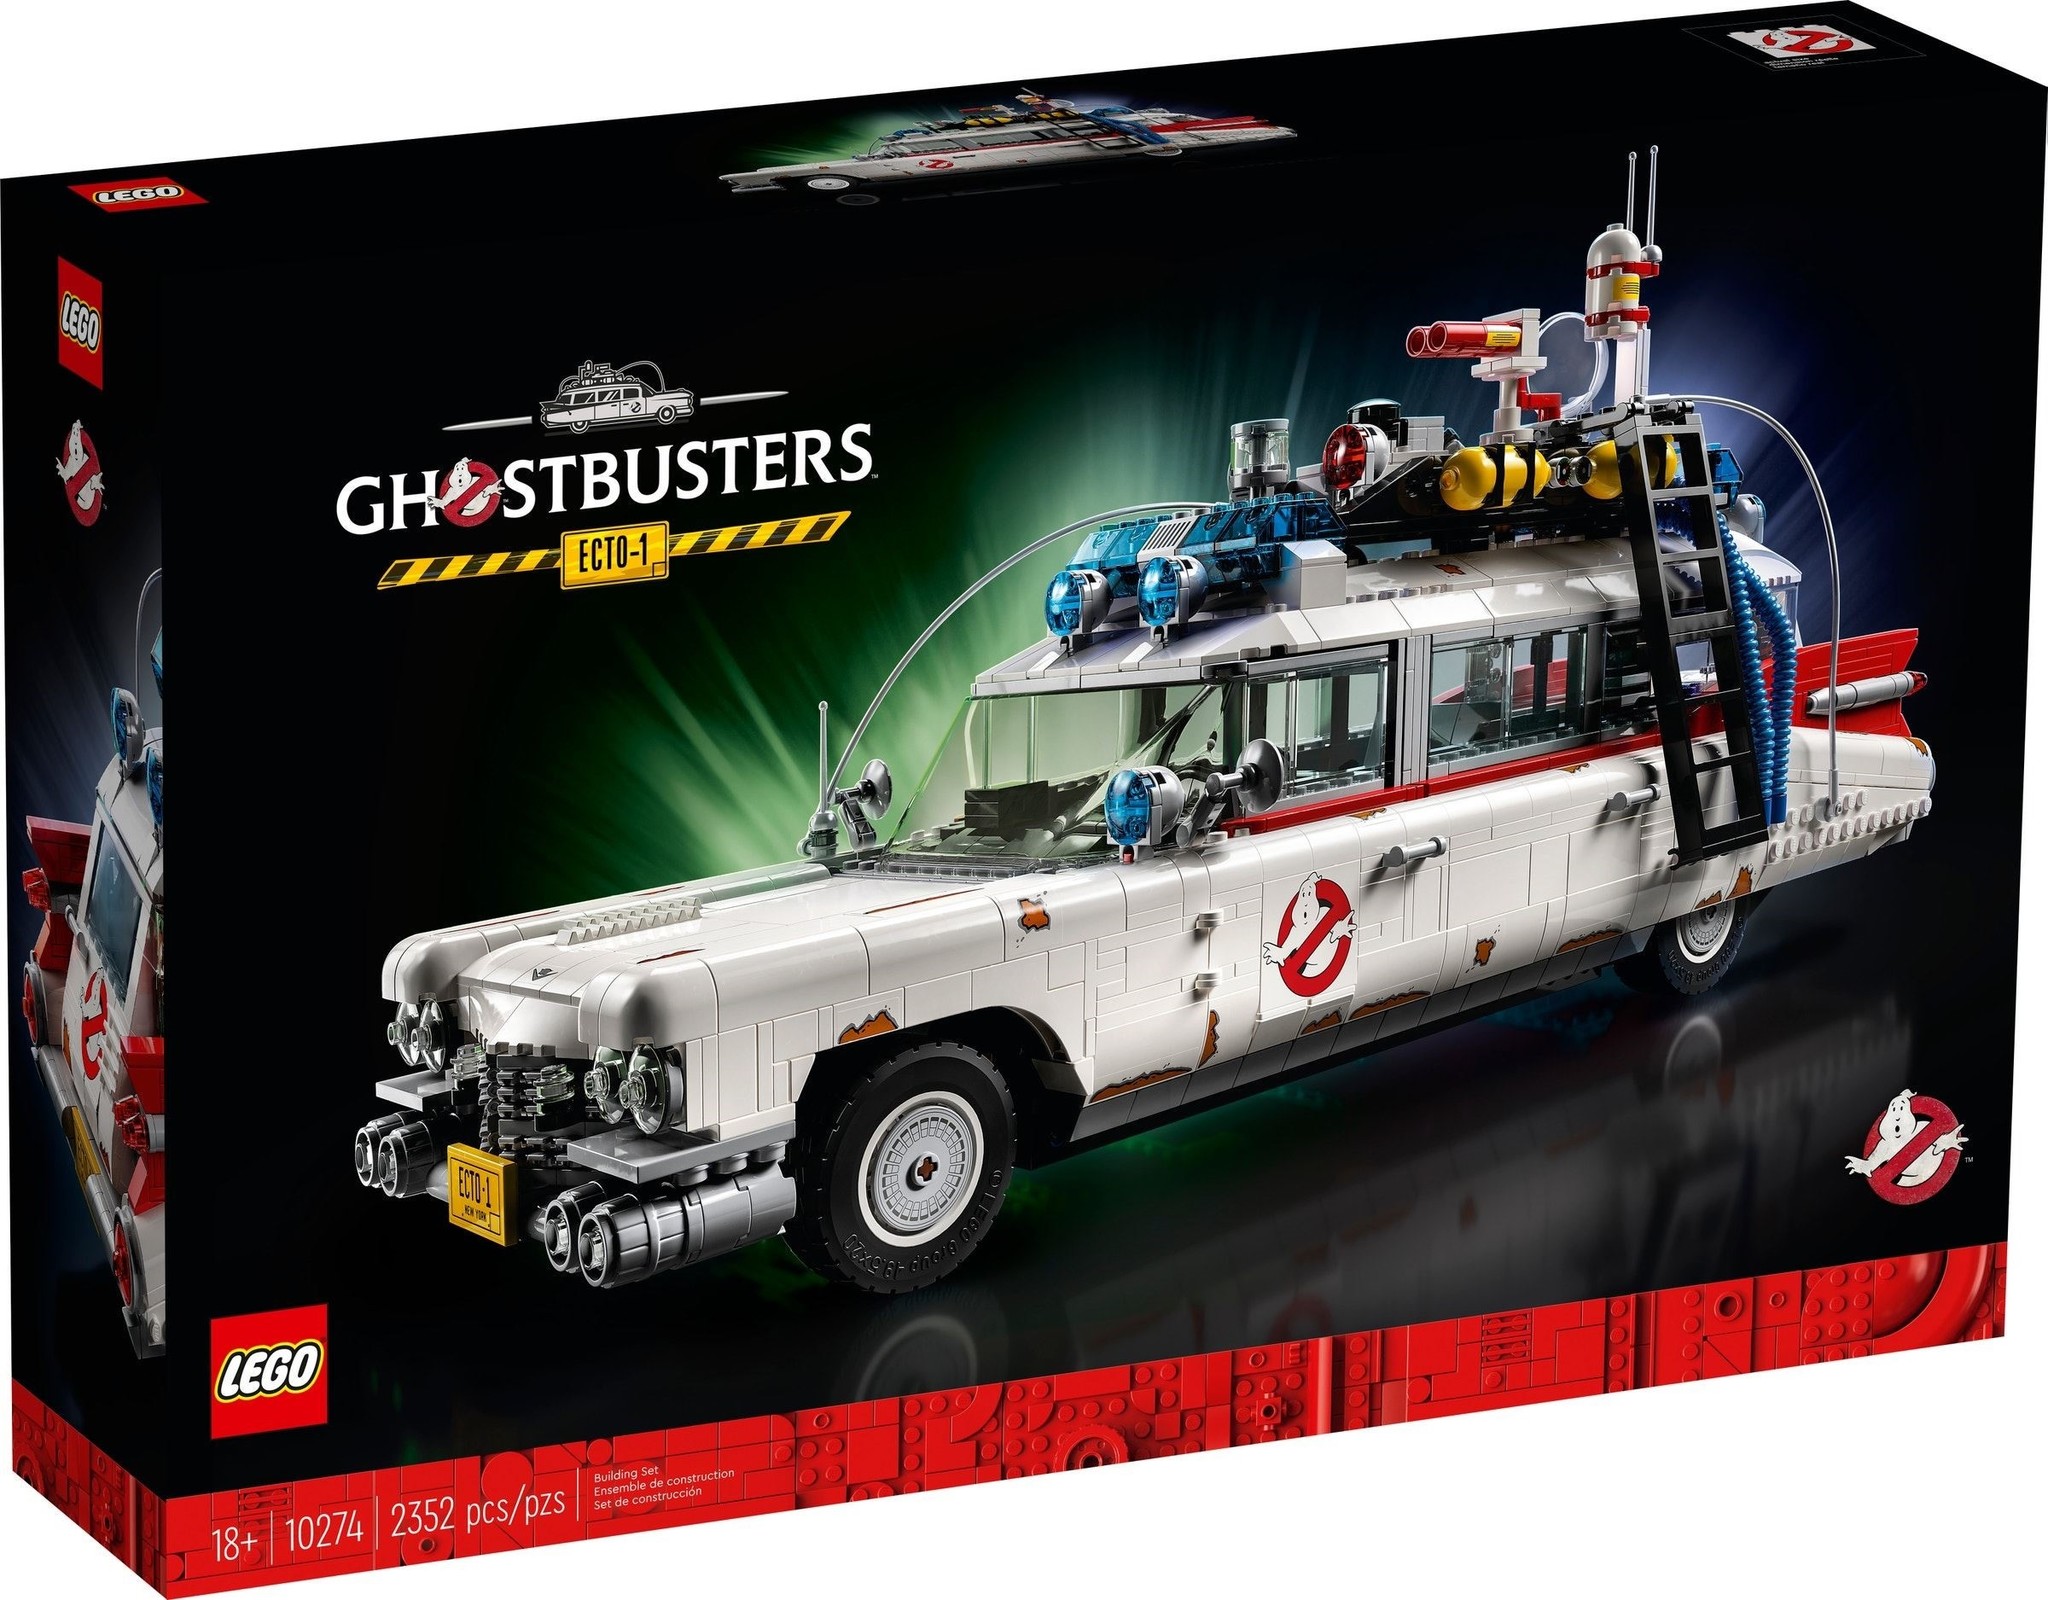 Playmobil Ghostbusters Ecto-1 Legendary Action Vehicle Figures Kids Toy Gift 